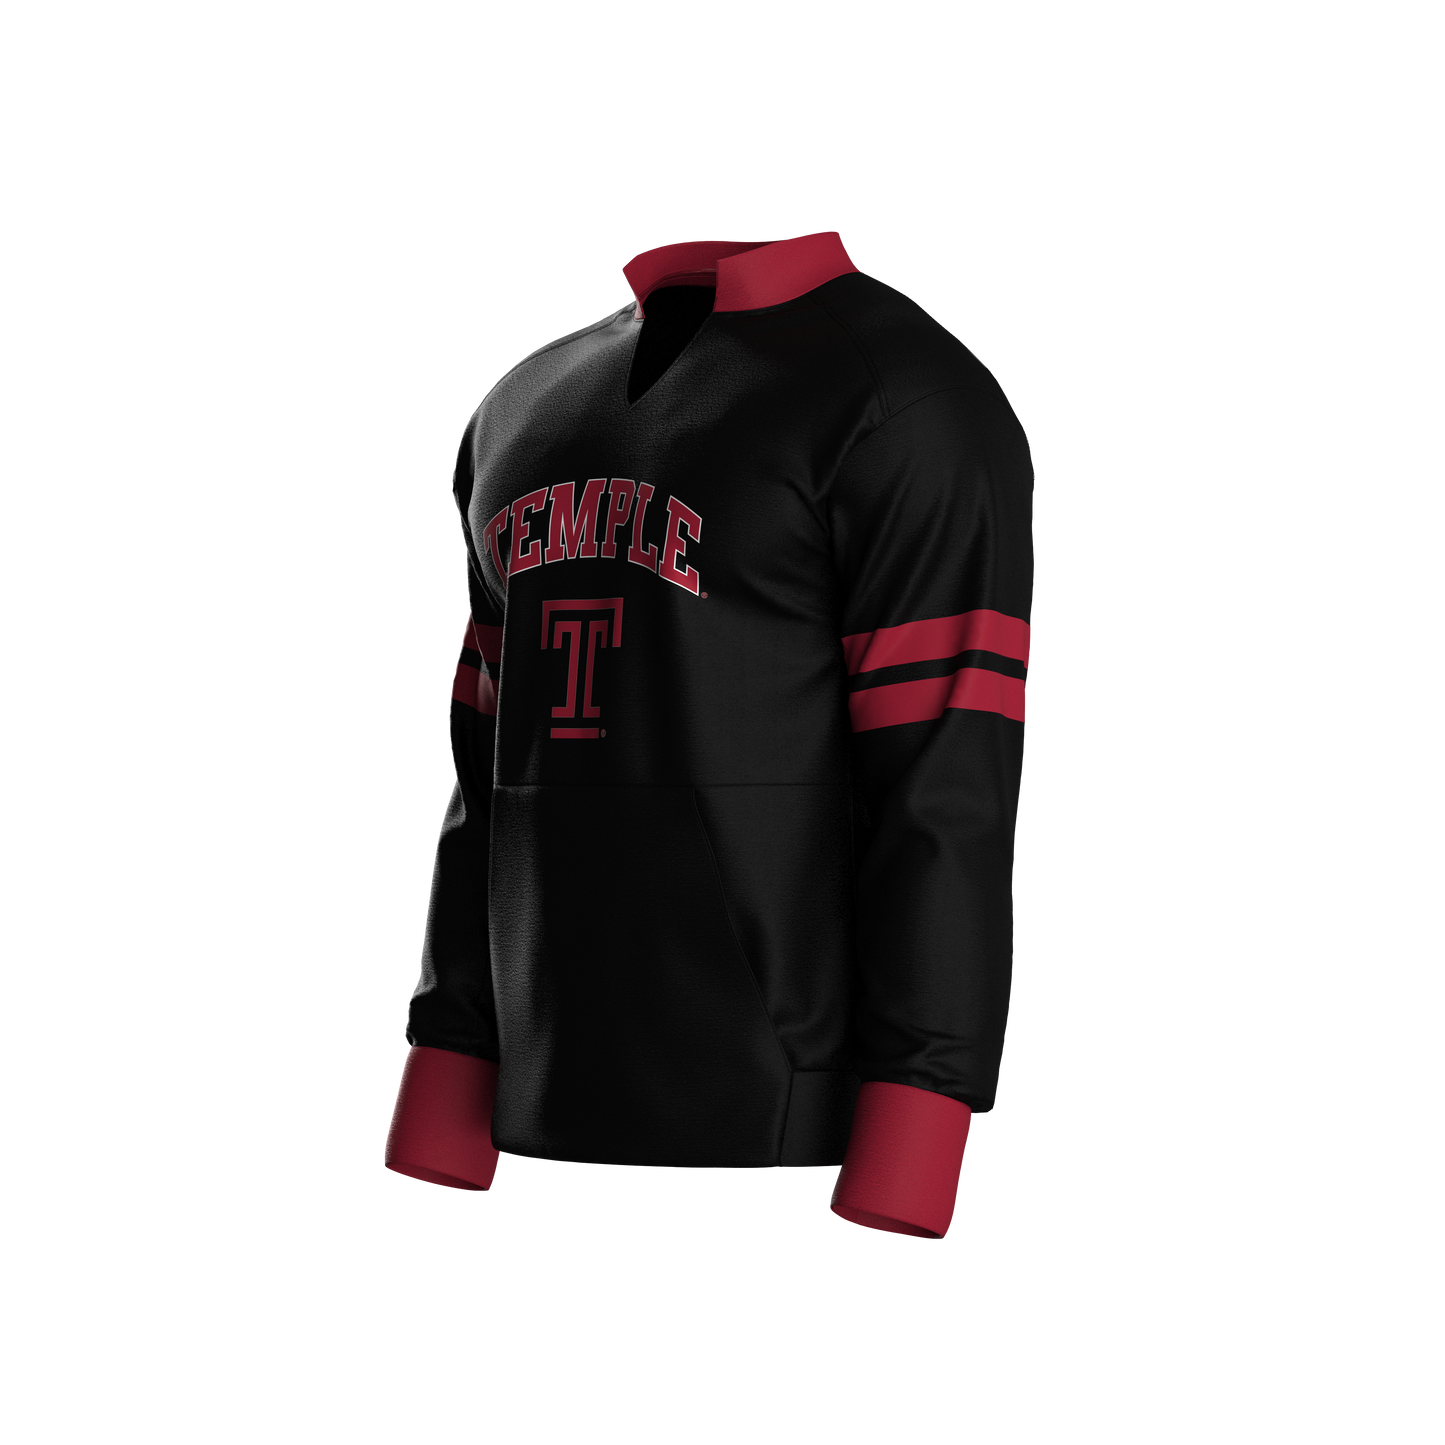 Temple University Away Pullover (youth)